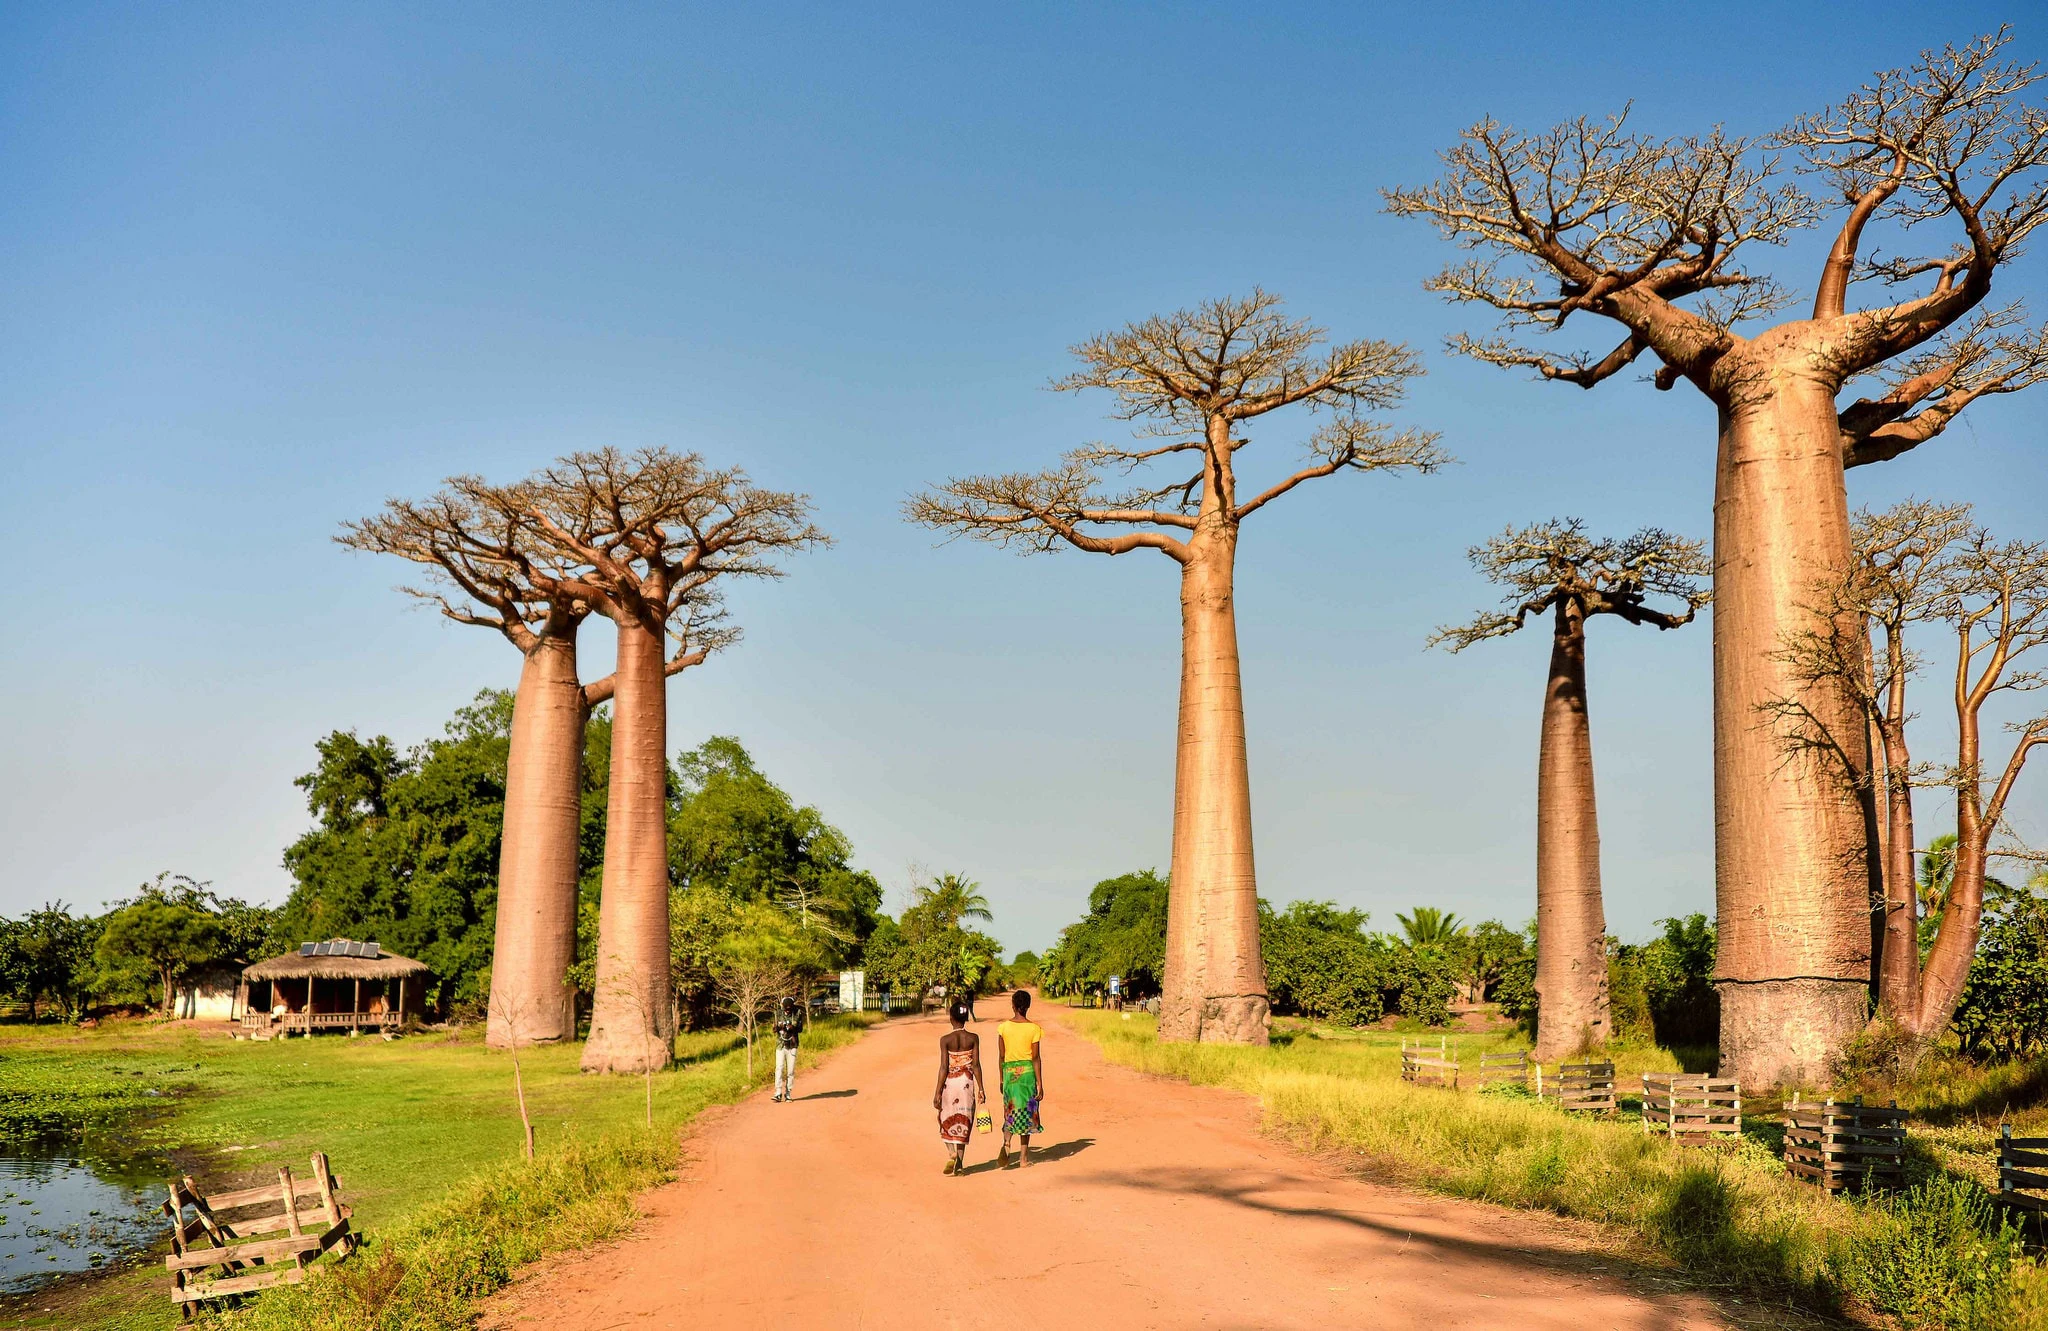 In this article, we will discuss 5 reasons why you should visit Madagascar.